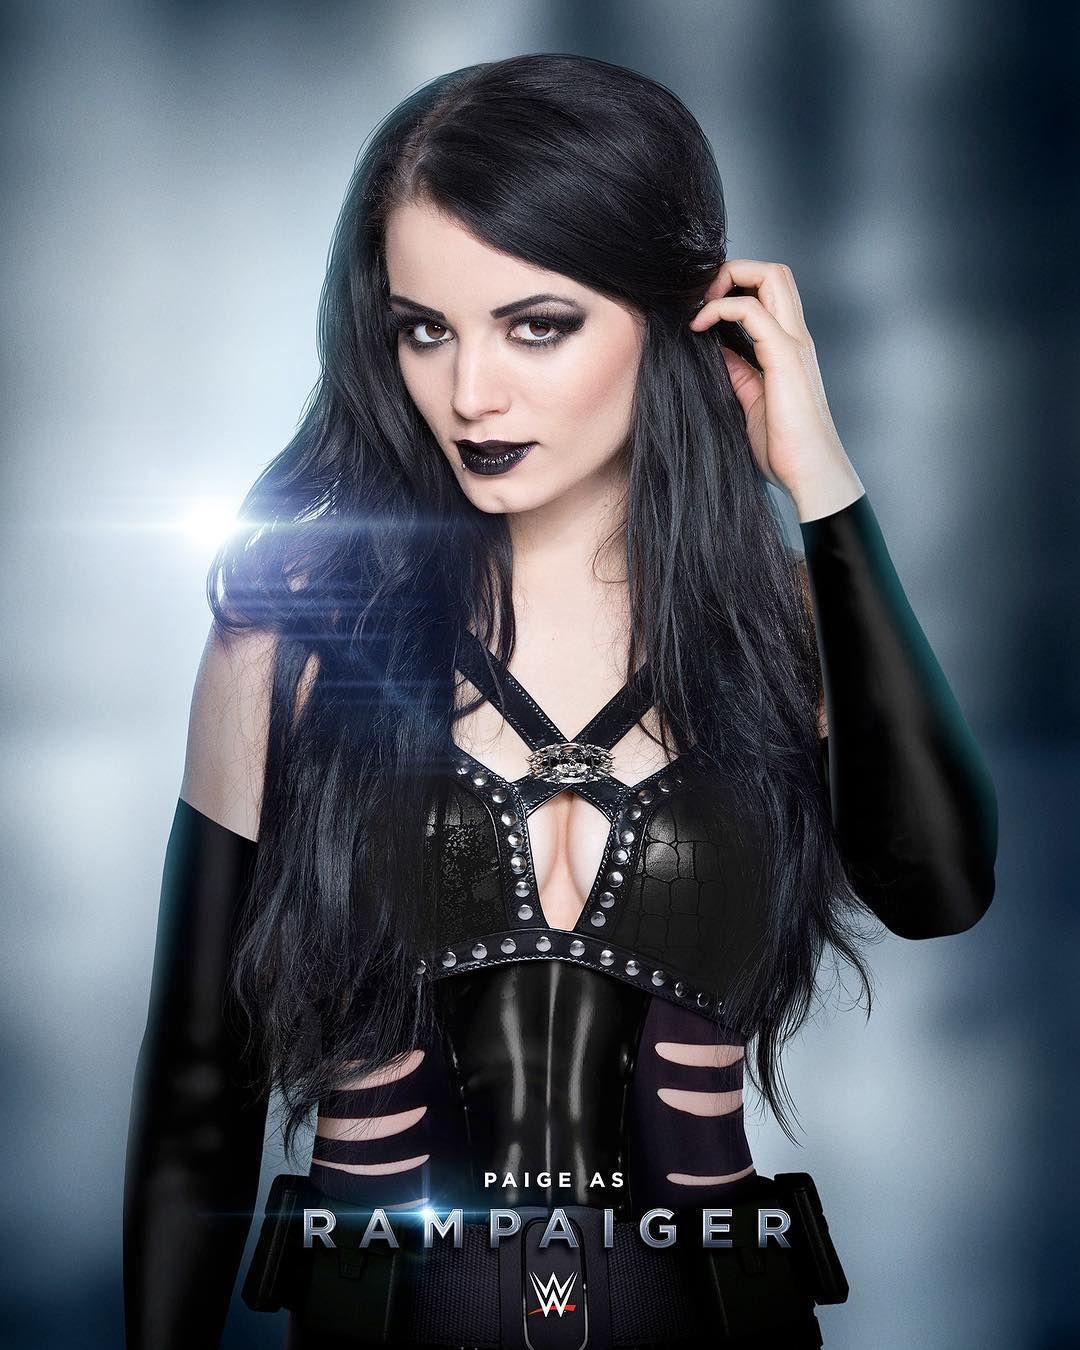 WWE Diva Paige Retro Colors Wallpapers